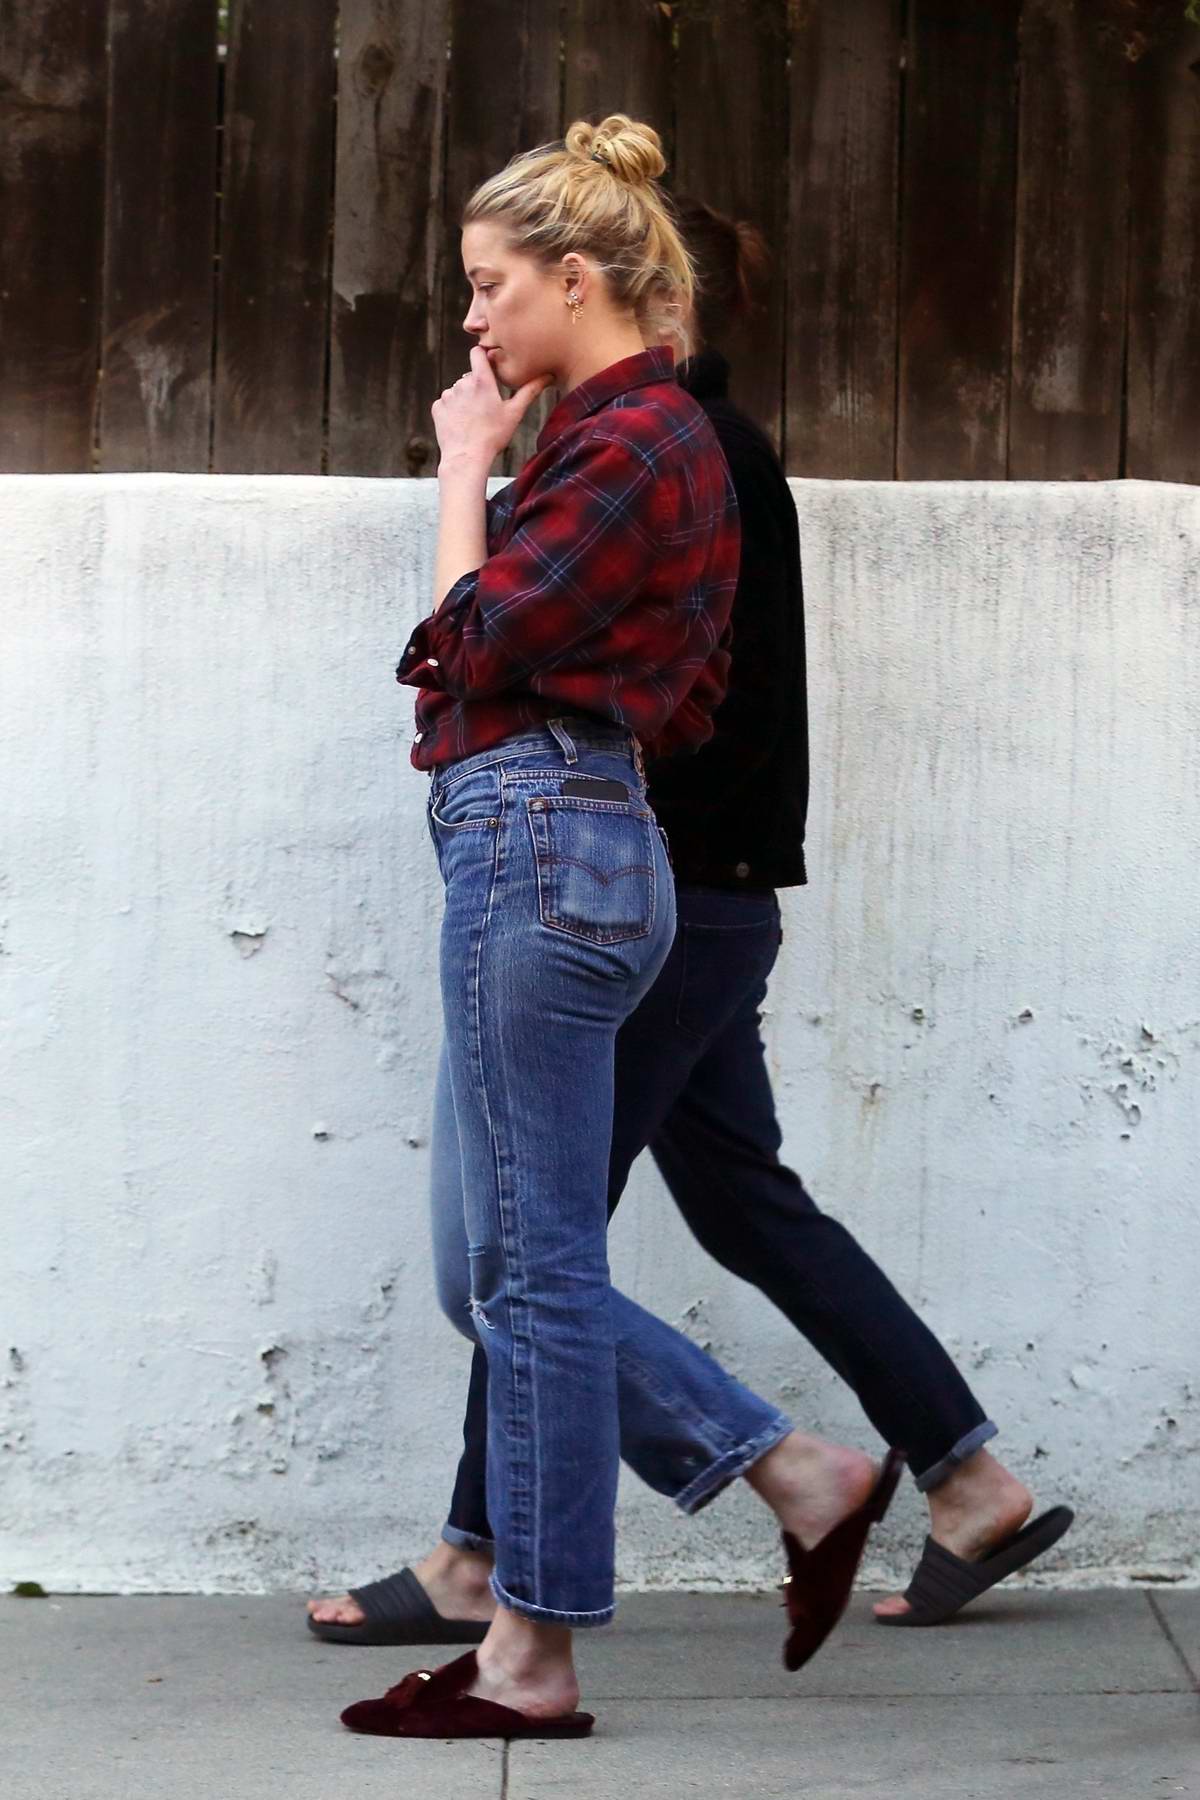 Amber Heard And Girlfriend Bianca Butti Step Out To See A Fire That Was Burning Close To Their Home In Los Angeles 110121 12